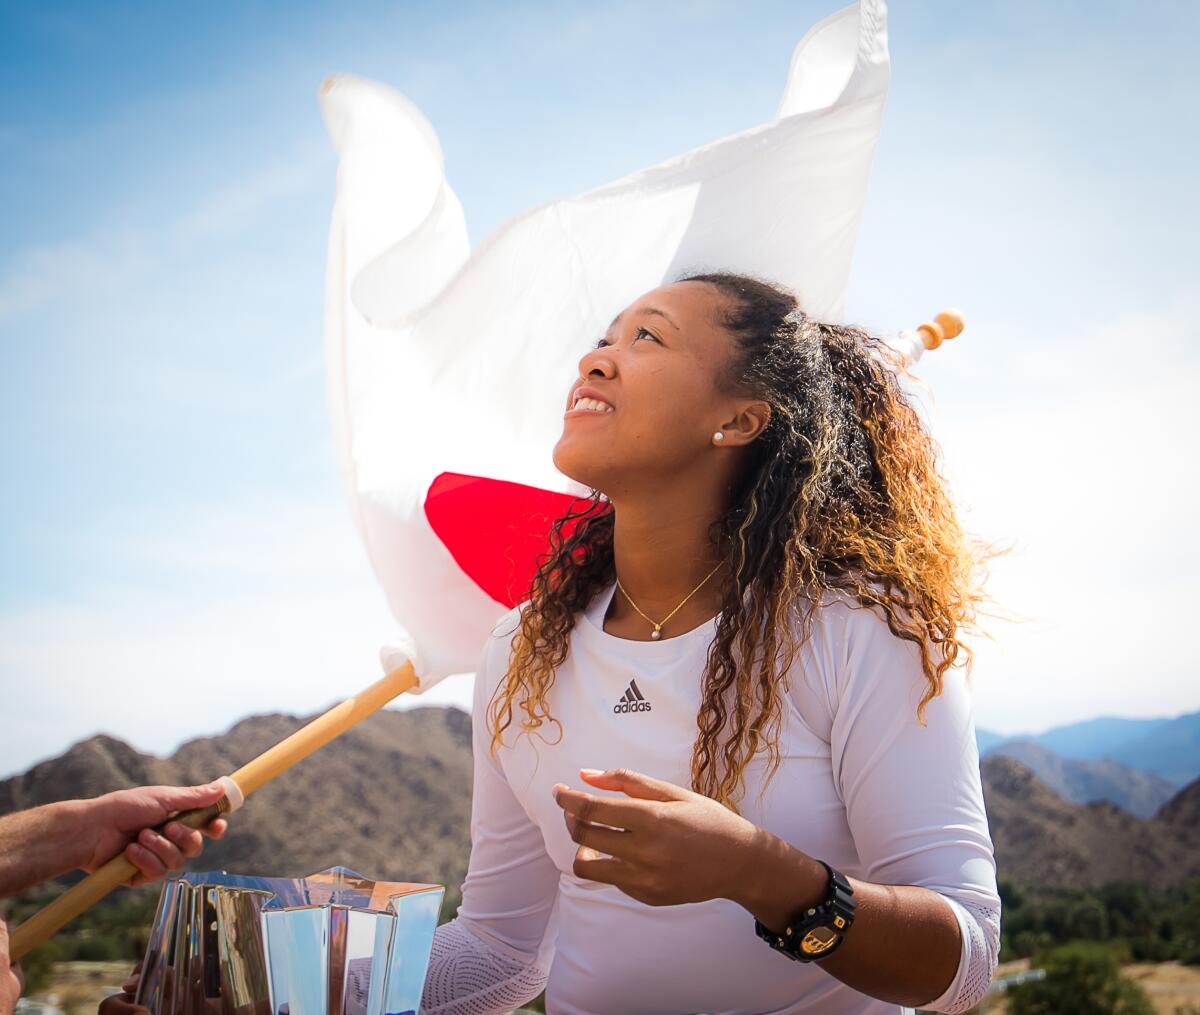 Naomi Osaka of Japan poses with the winner's trophy at the 2018 BNP Paribas Open in Indian Wells, Calif.